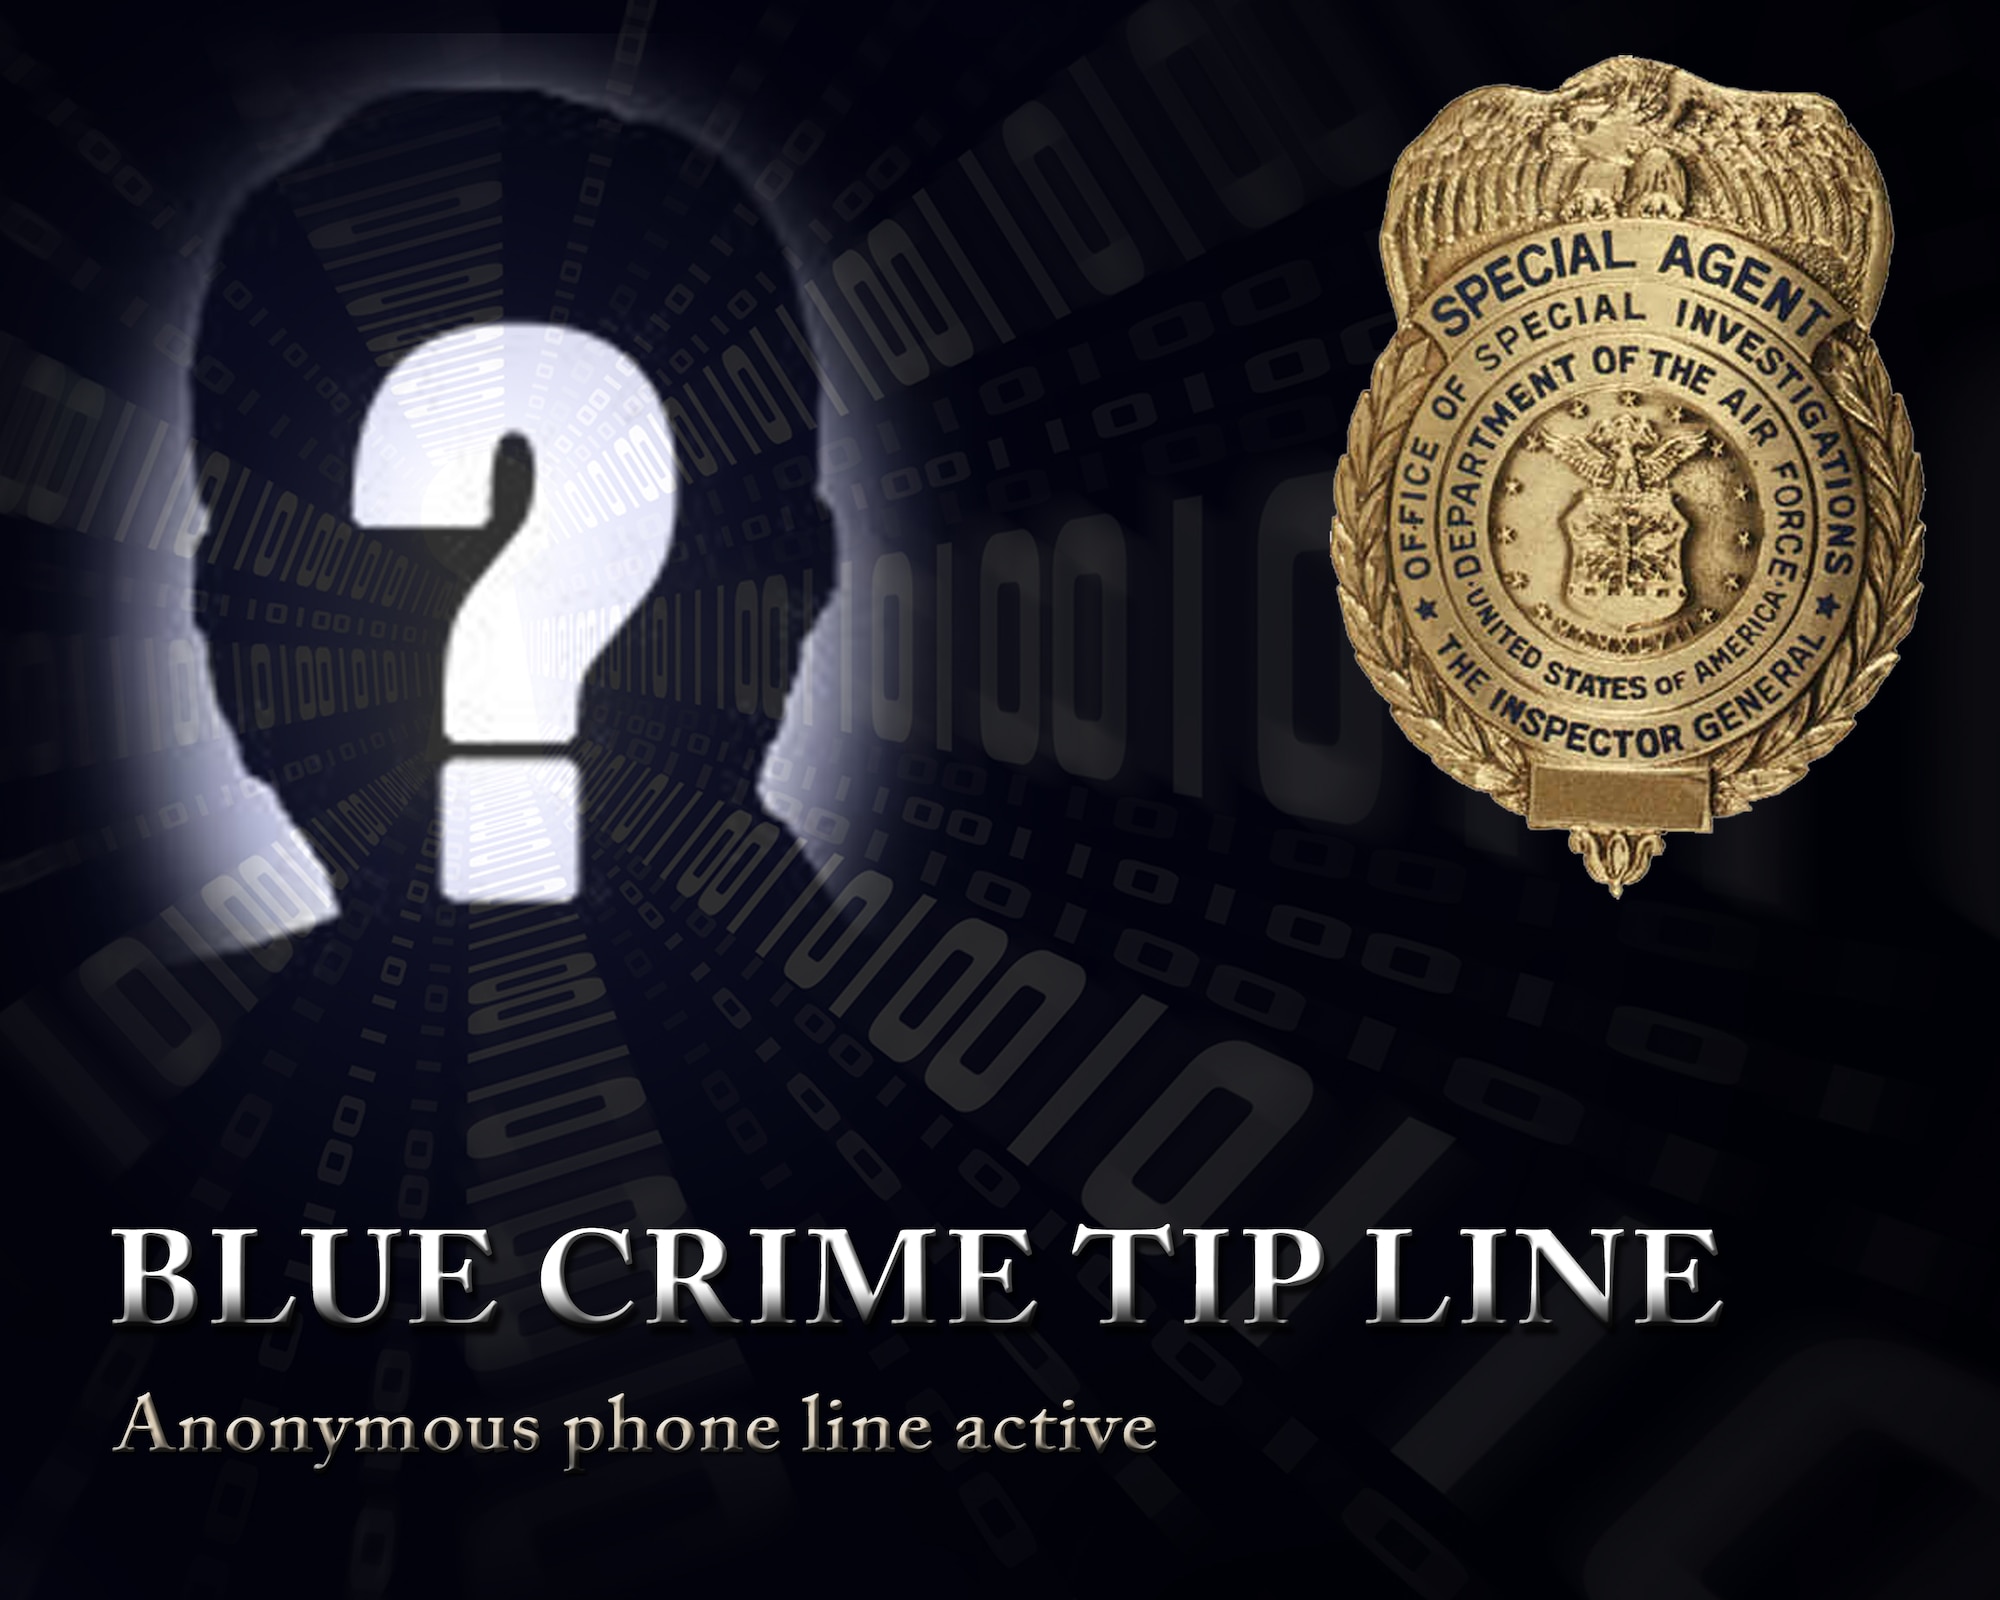 RJA Anonymous Tip Line is now available!